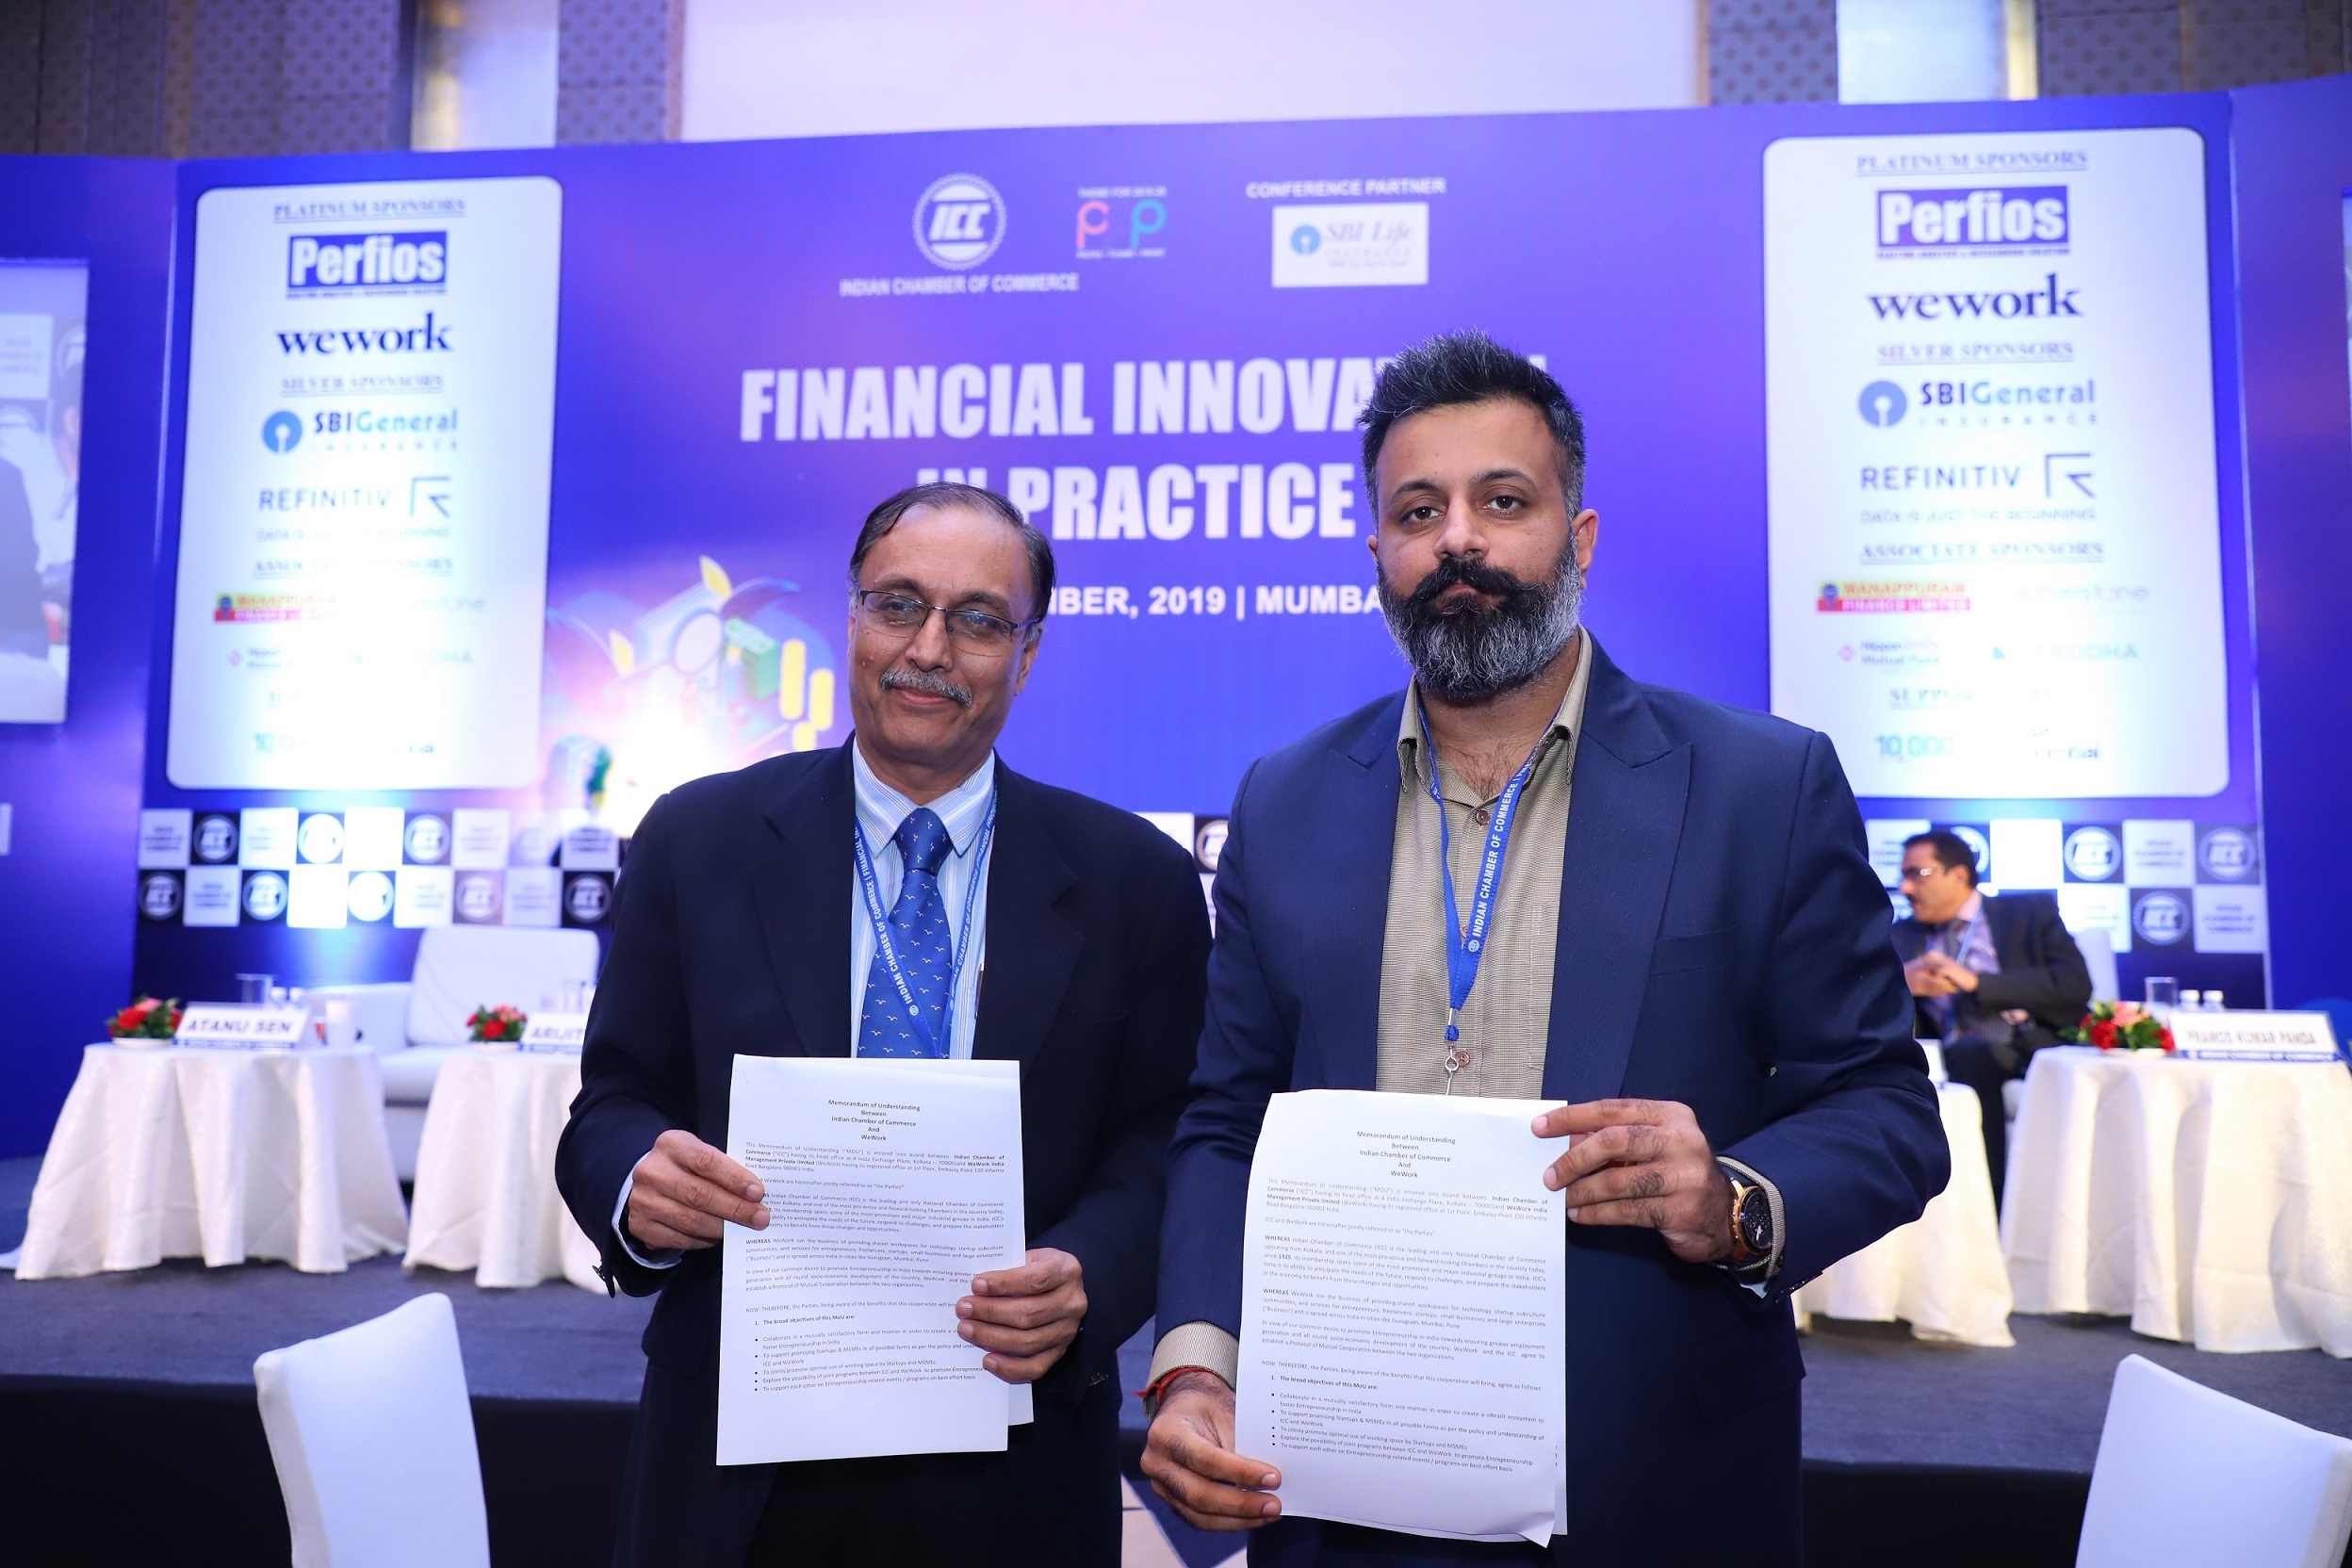 MoU signing ceremony between Indian Chamber of Commerce and Wework; L-R: Mr Atanu Sen, Chairman, BFSI Committee, Indian Chamber of Commerce & Mr. Vineet Singh, Head of Brand & Marketing WeWork , for WeWork. -Photo By GPN